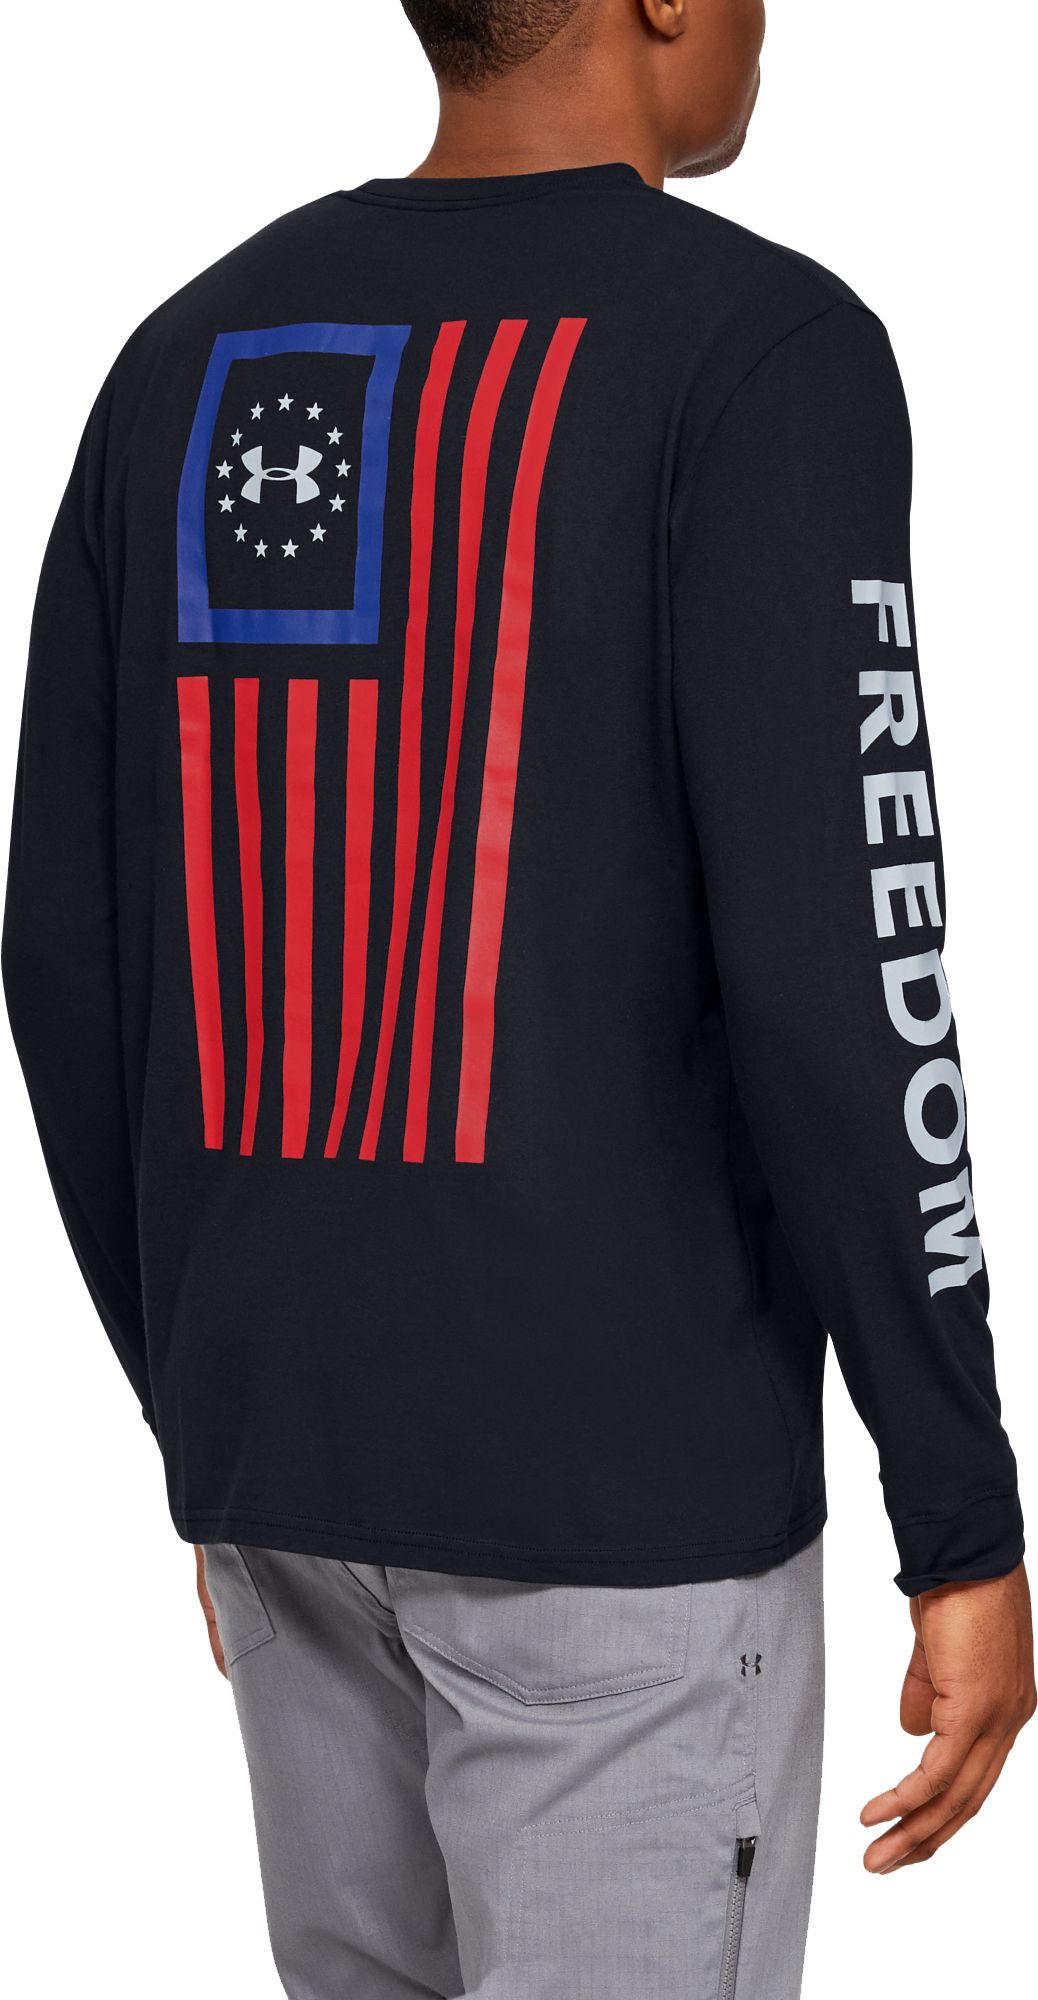 under armour freedom